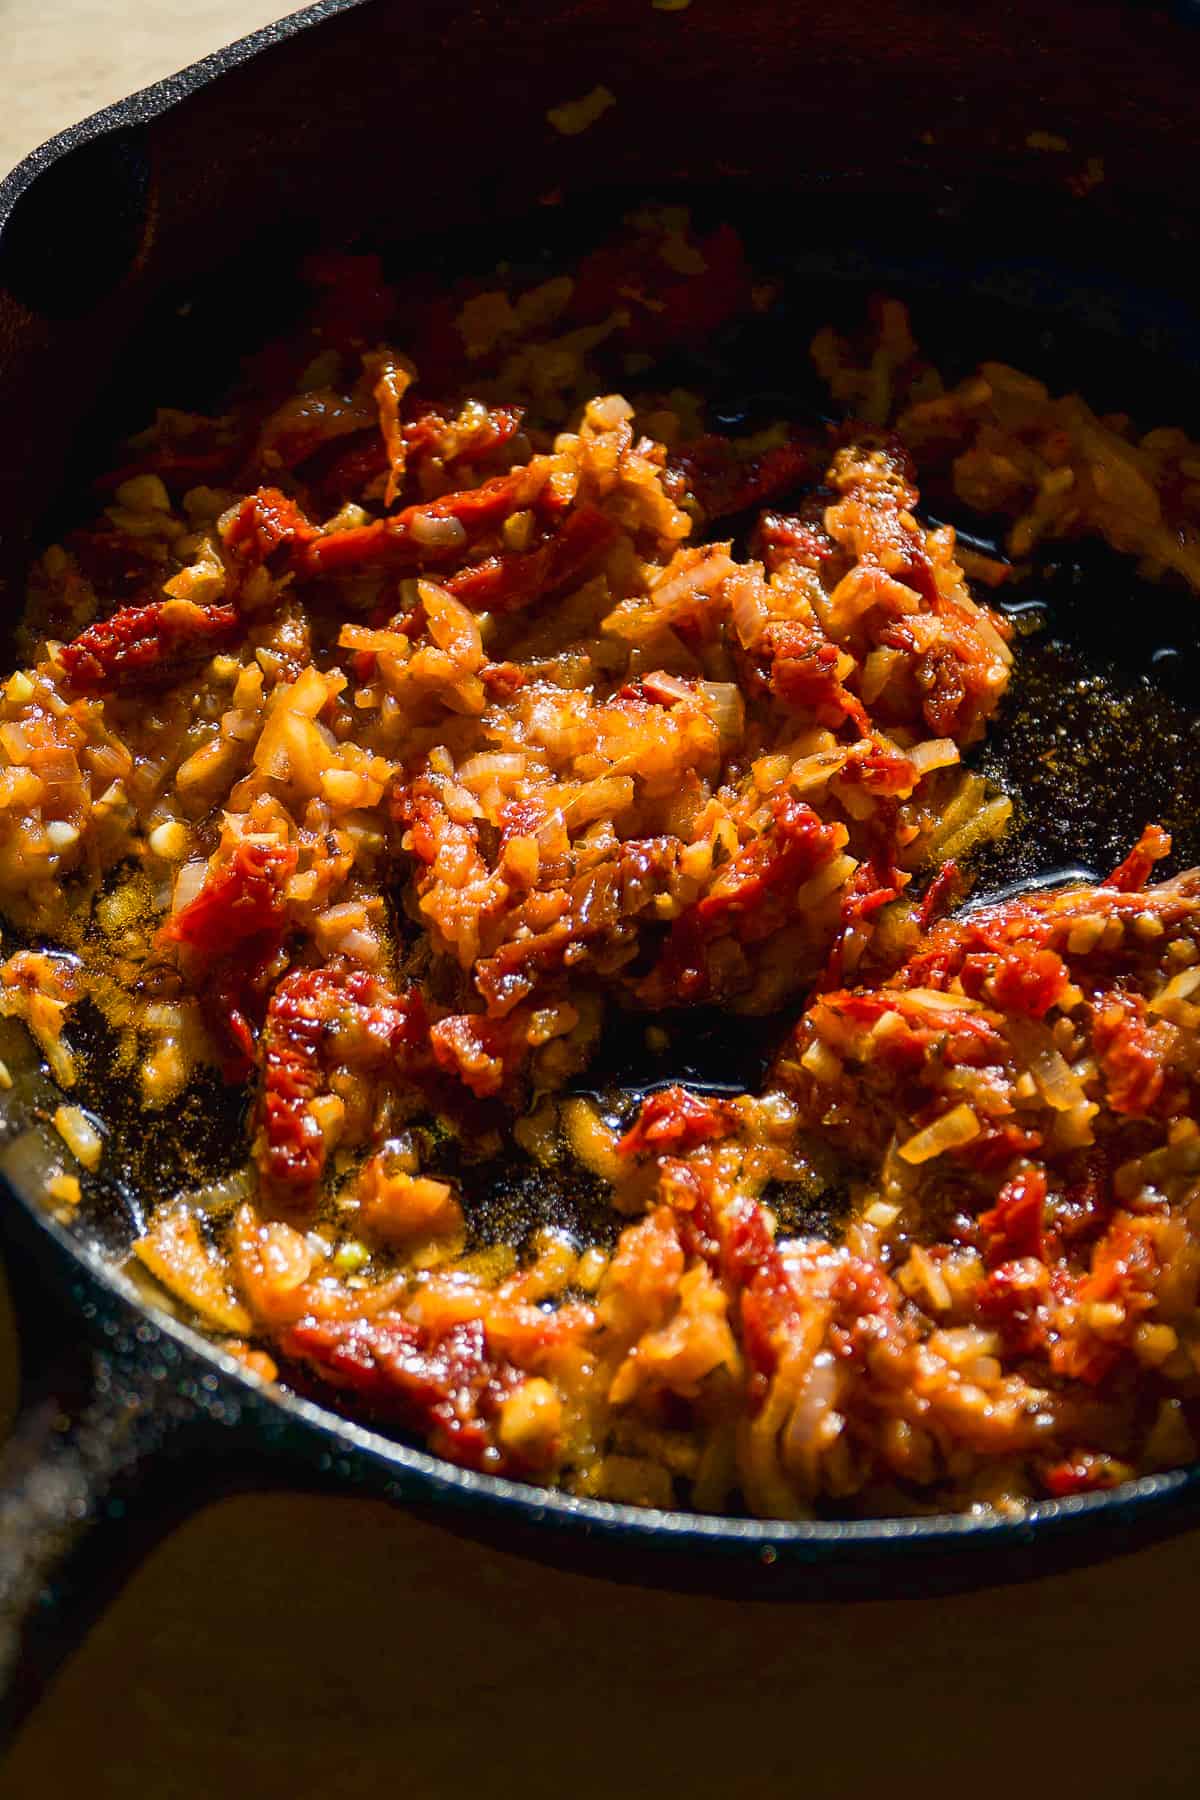 Sundried tomatoes mixed into shallots and garlic in a skillet.